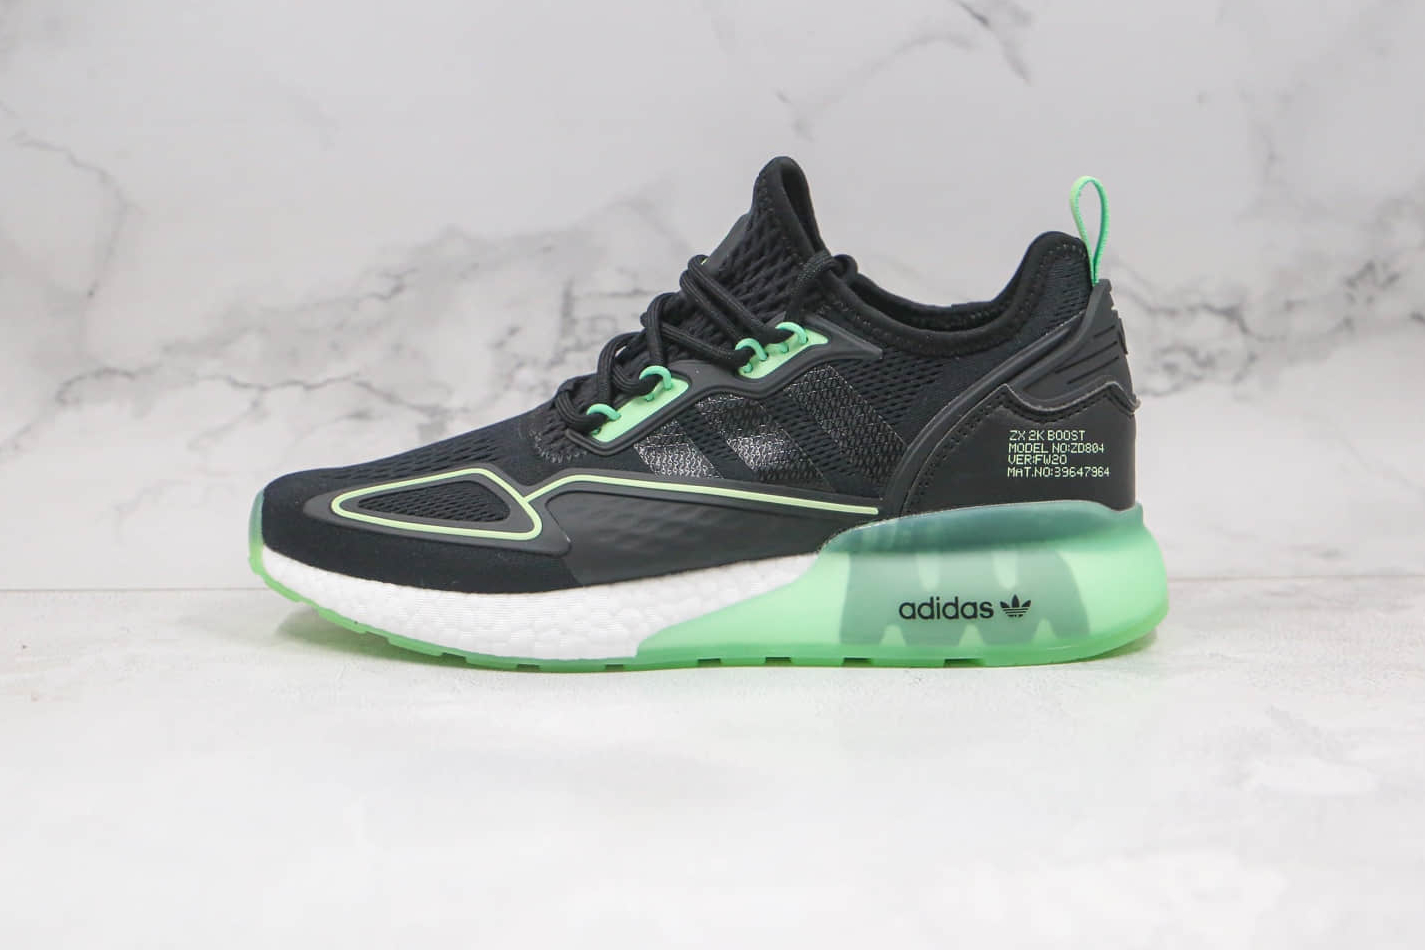 Adidas Originals ZX 2K Boost 'Black Green White' H67935 - Limited Edition Sneakers